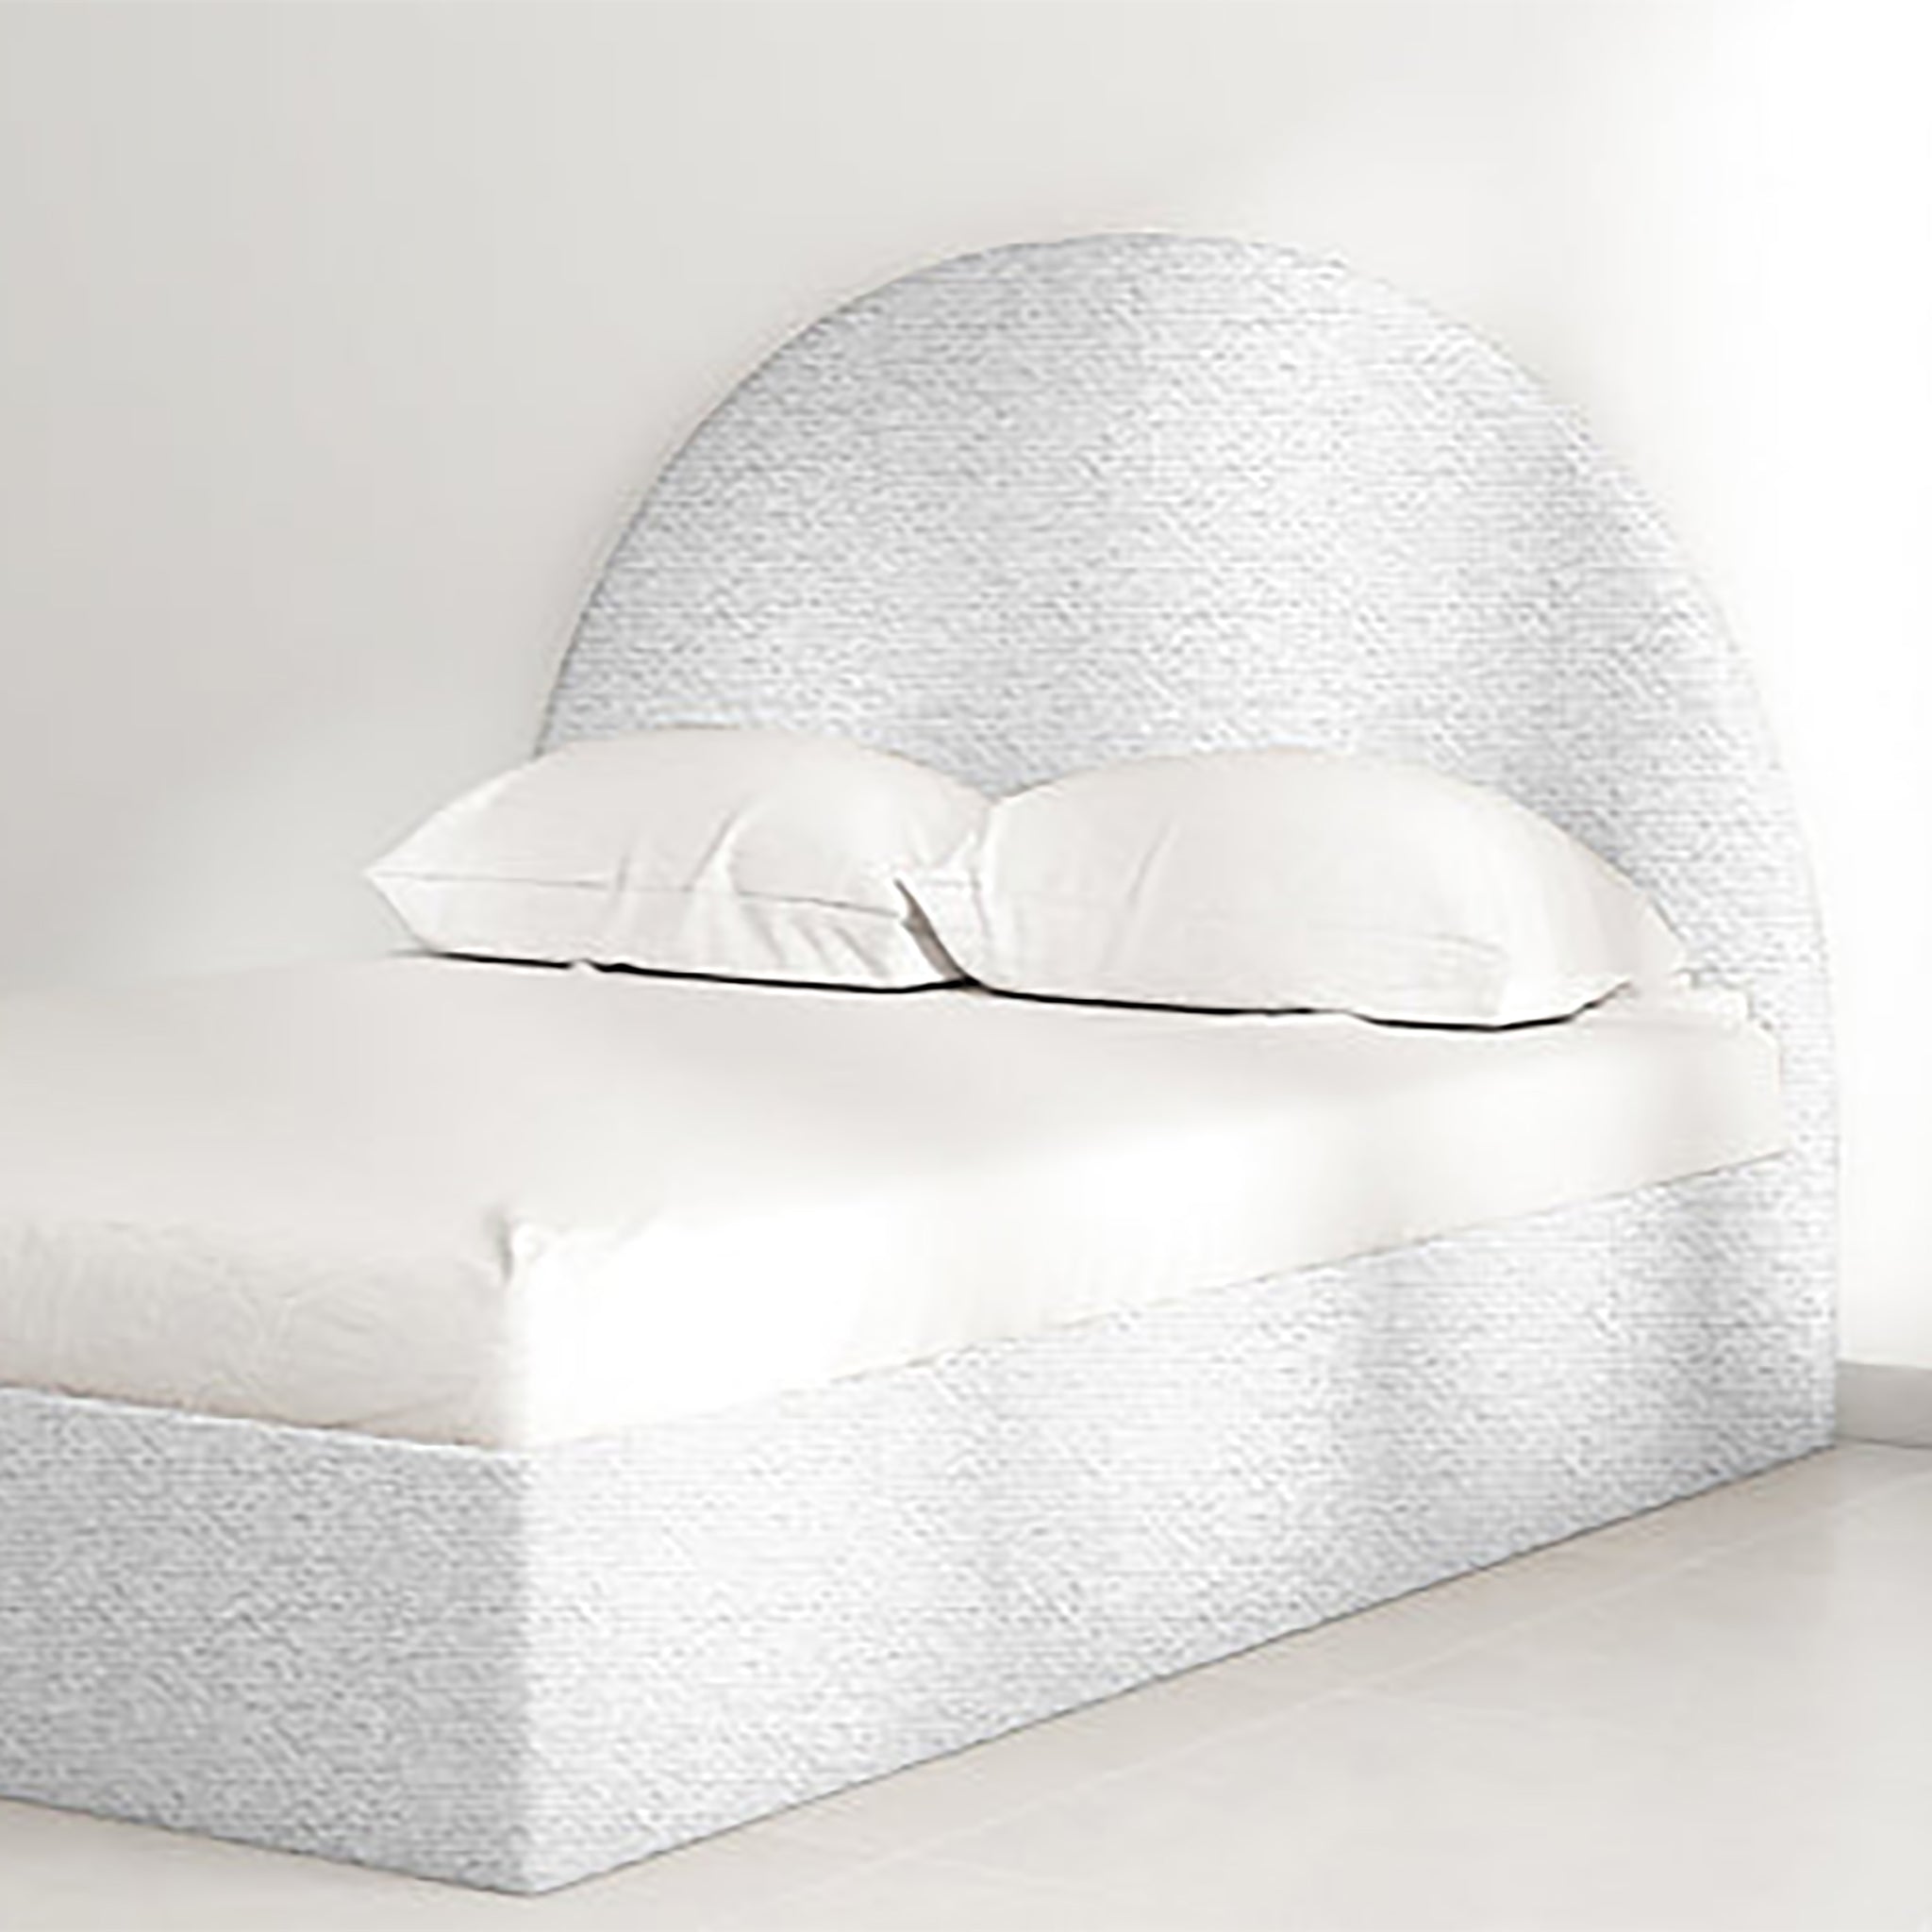 The Archie Bed featuring a luxurious curved headboard in light grey textured upholstery. Modern and space-saving design, perfect for tight spaces, master bedrooms, and guest rooms. Elegant and comfortable furniture for contemporary homes.